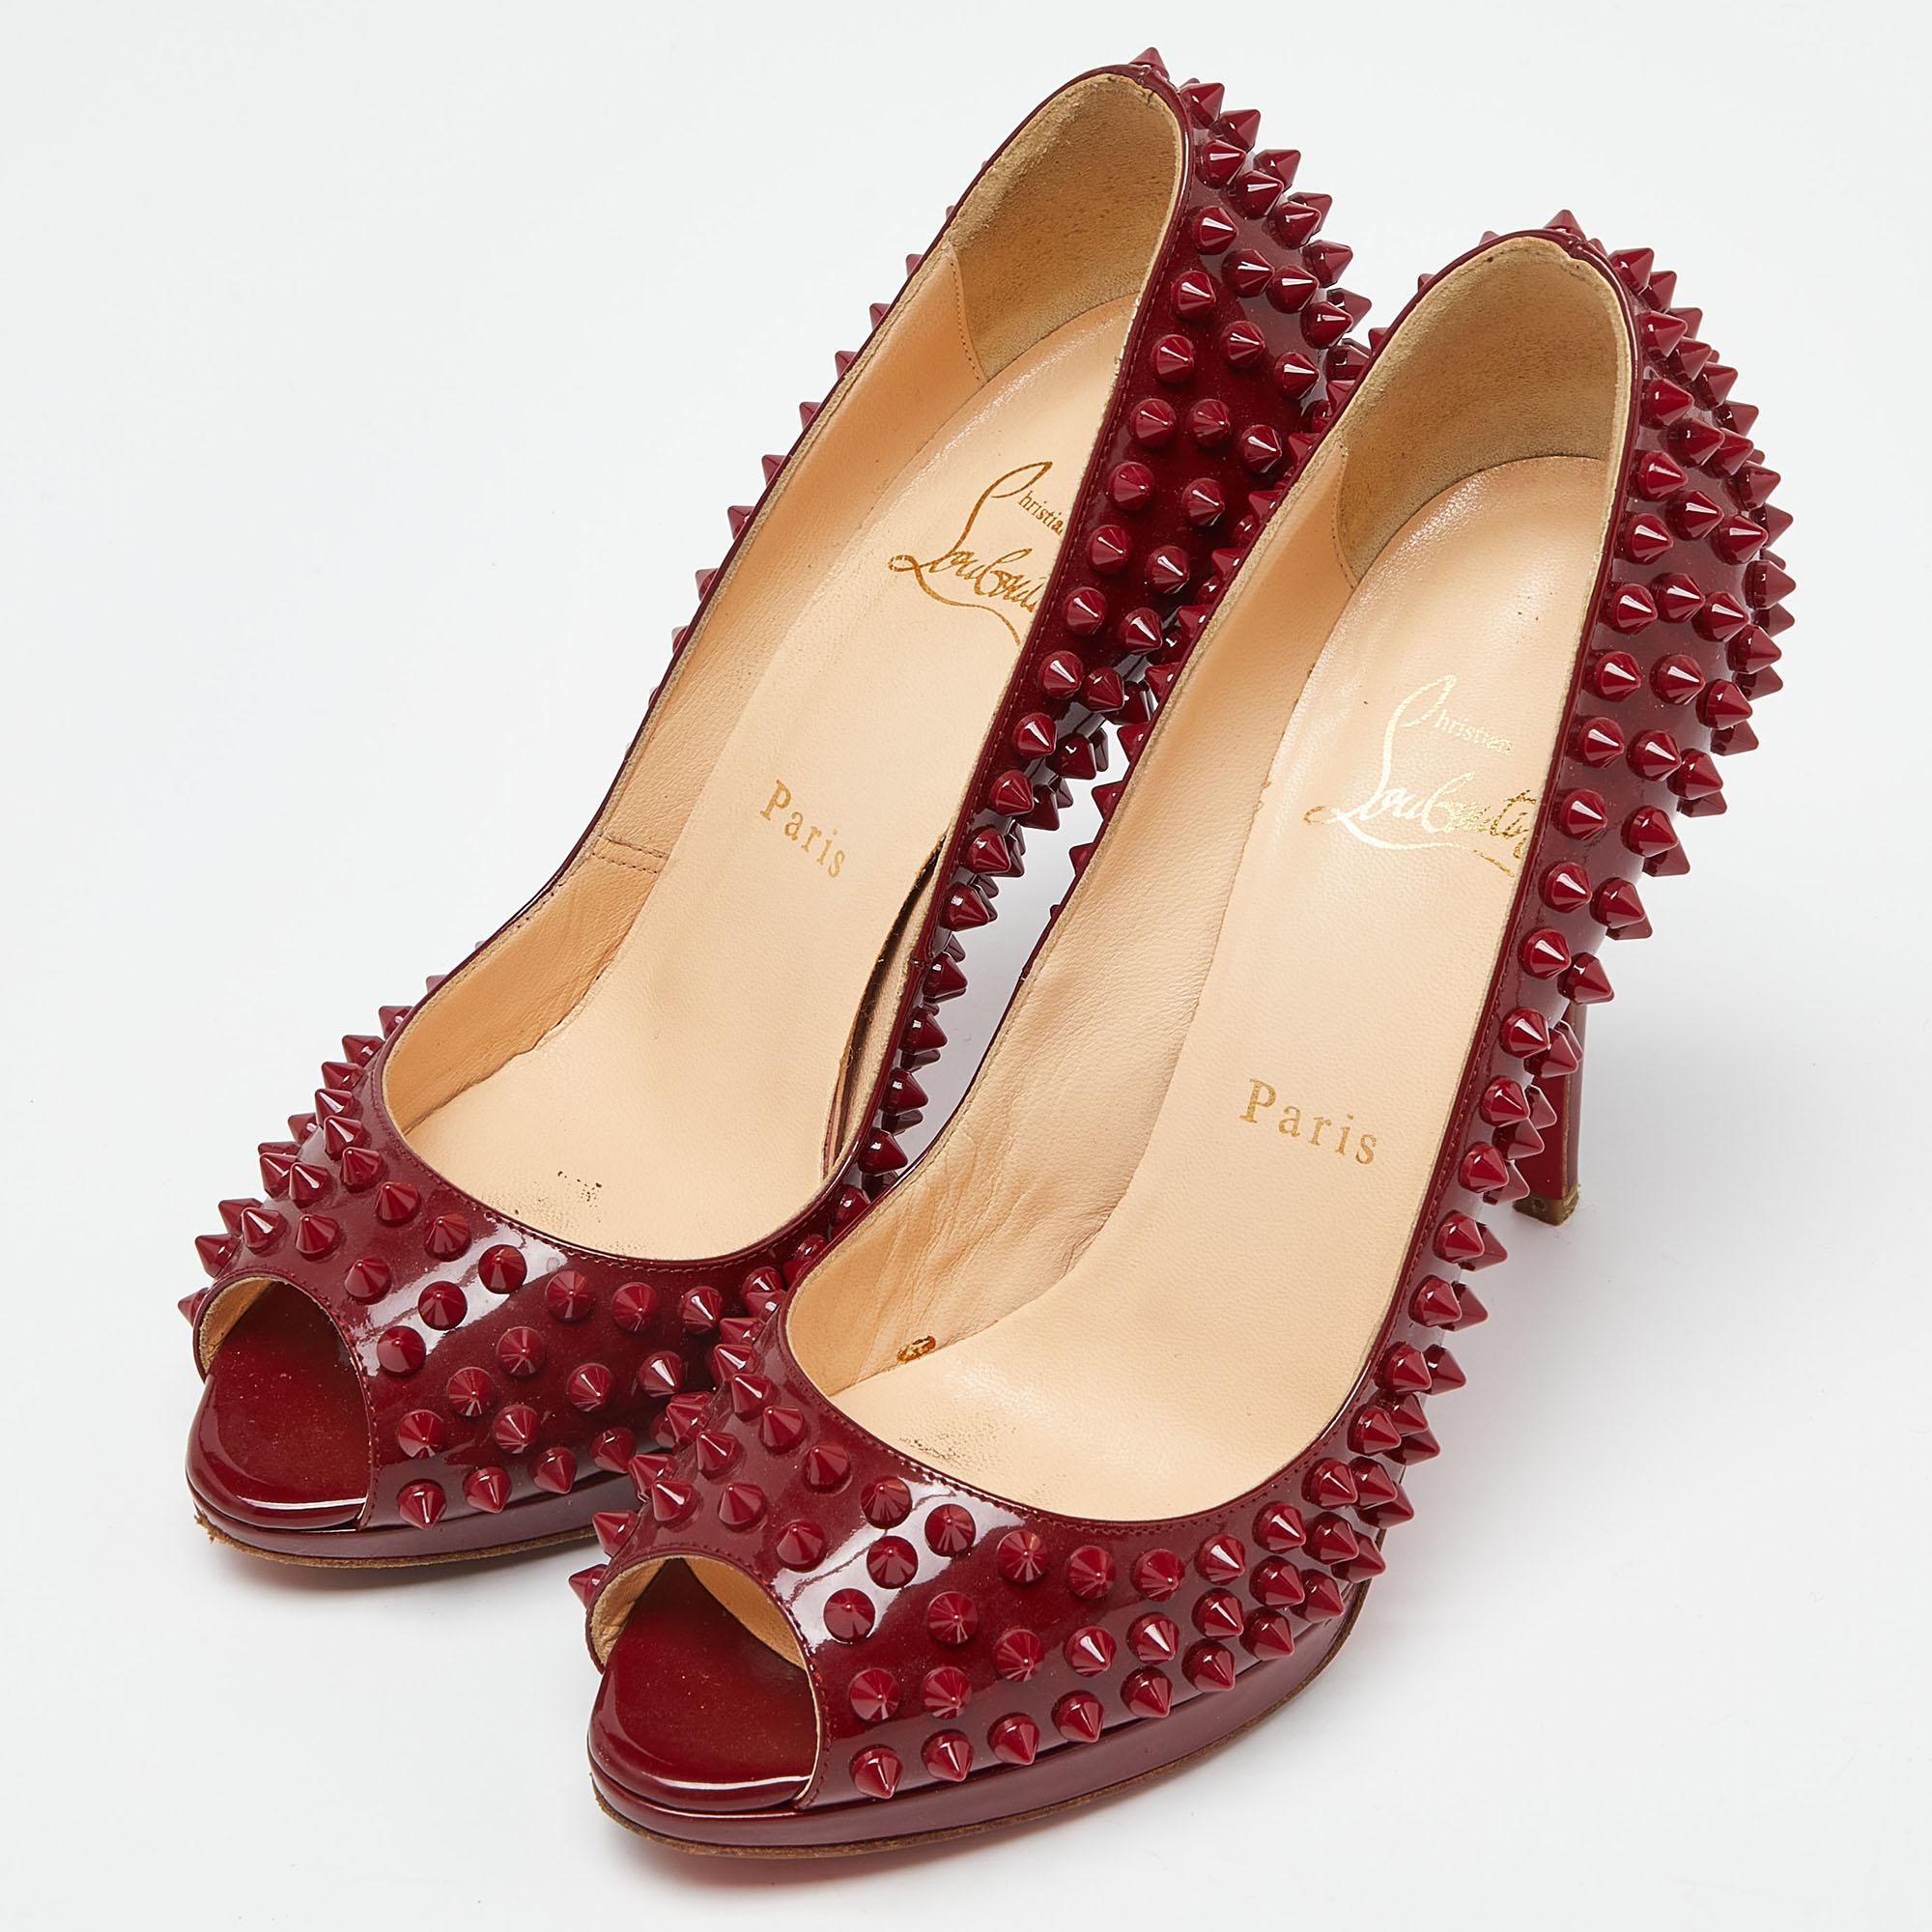 Christian Louboutin Red Patent Leather Yolanda Spiked Peep-Toe Pumps Size 37.5 For Sale 6